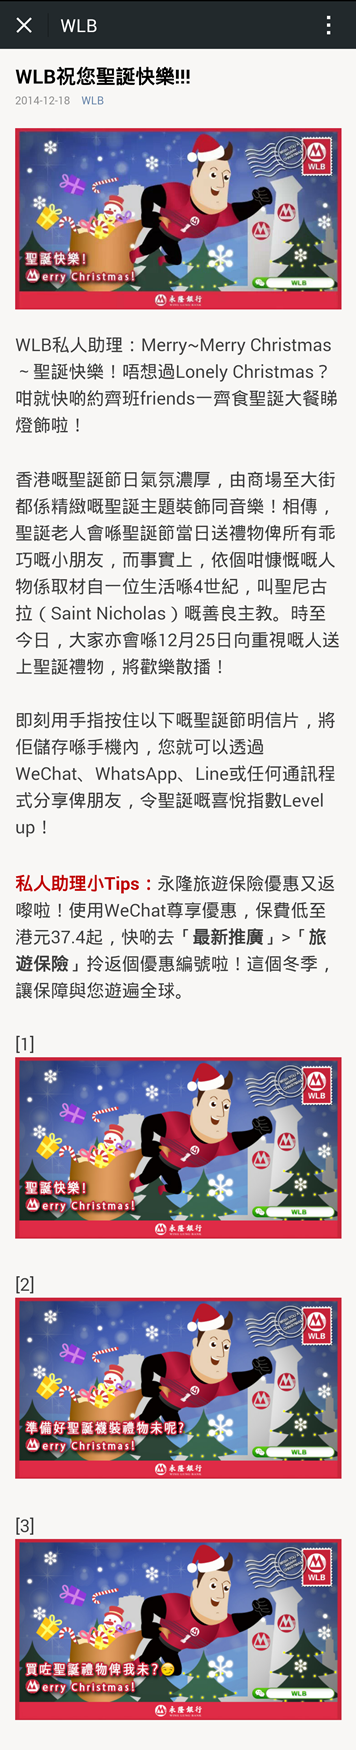 WLB WeChat Christmas Feed